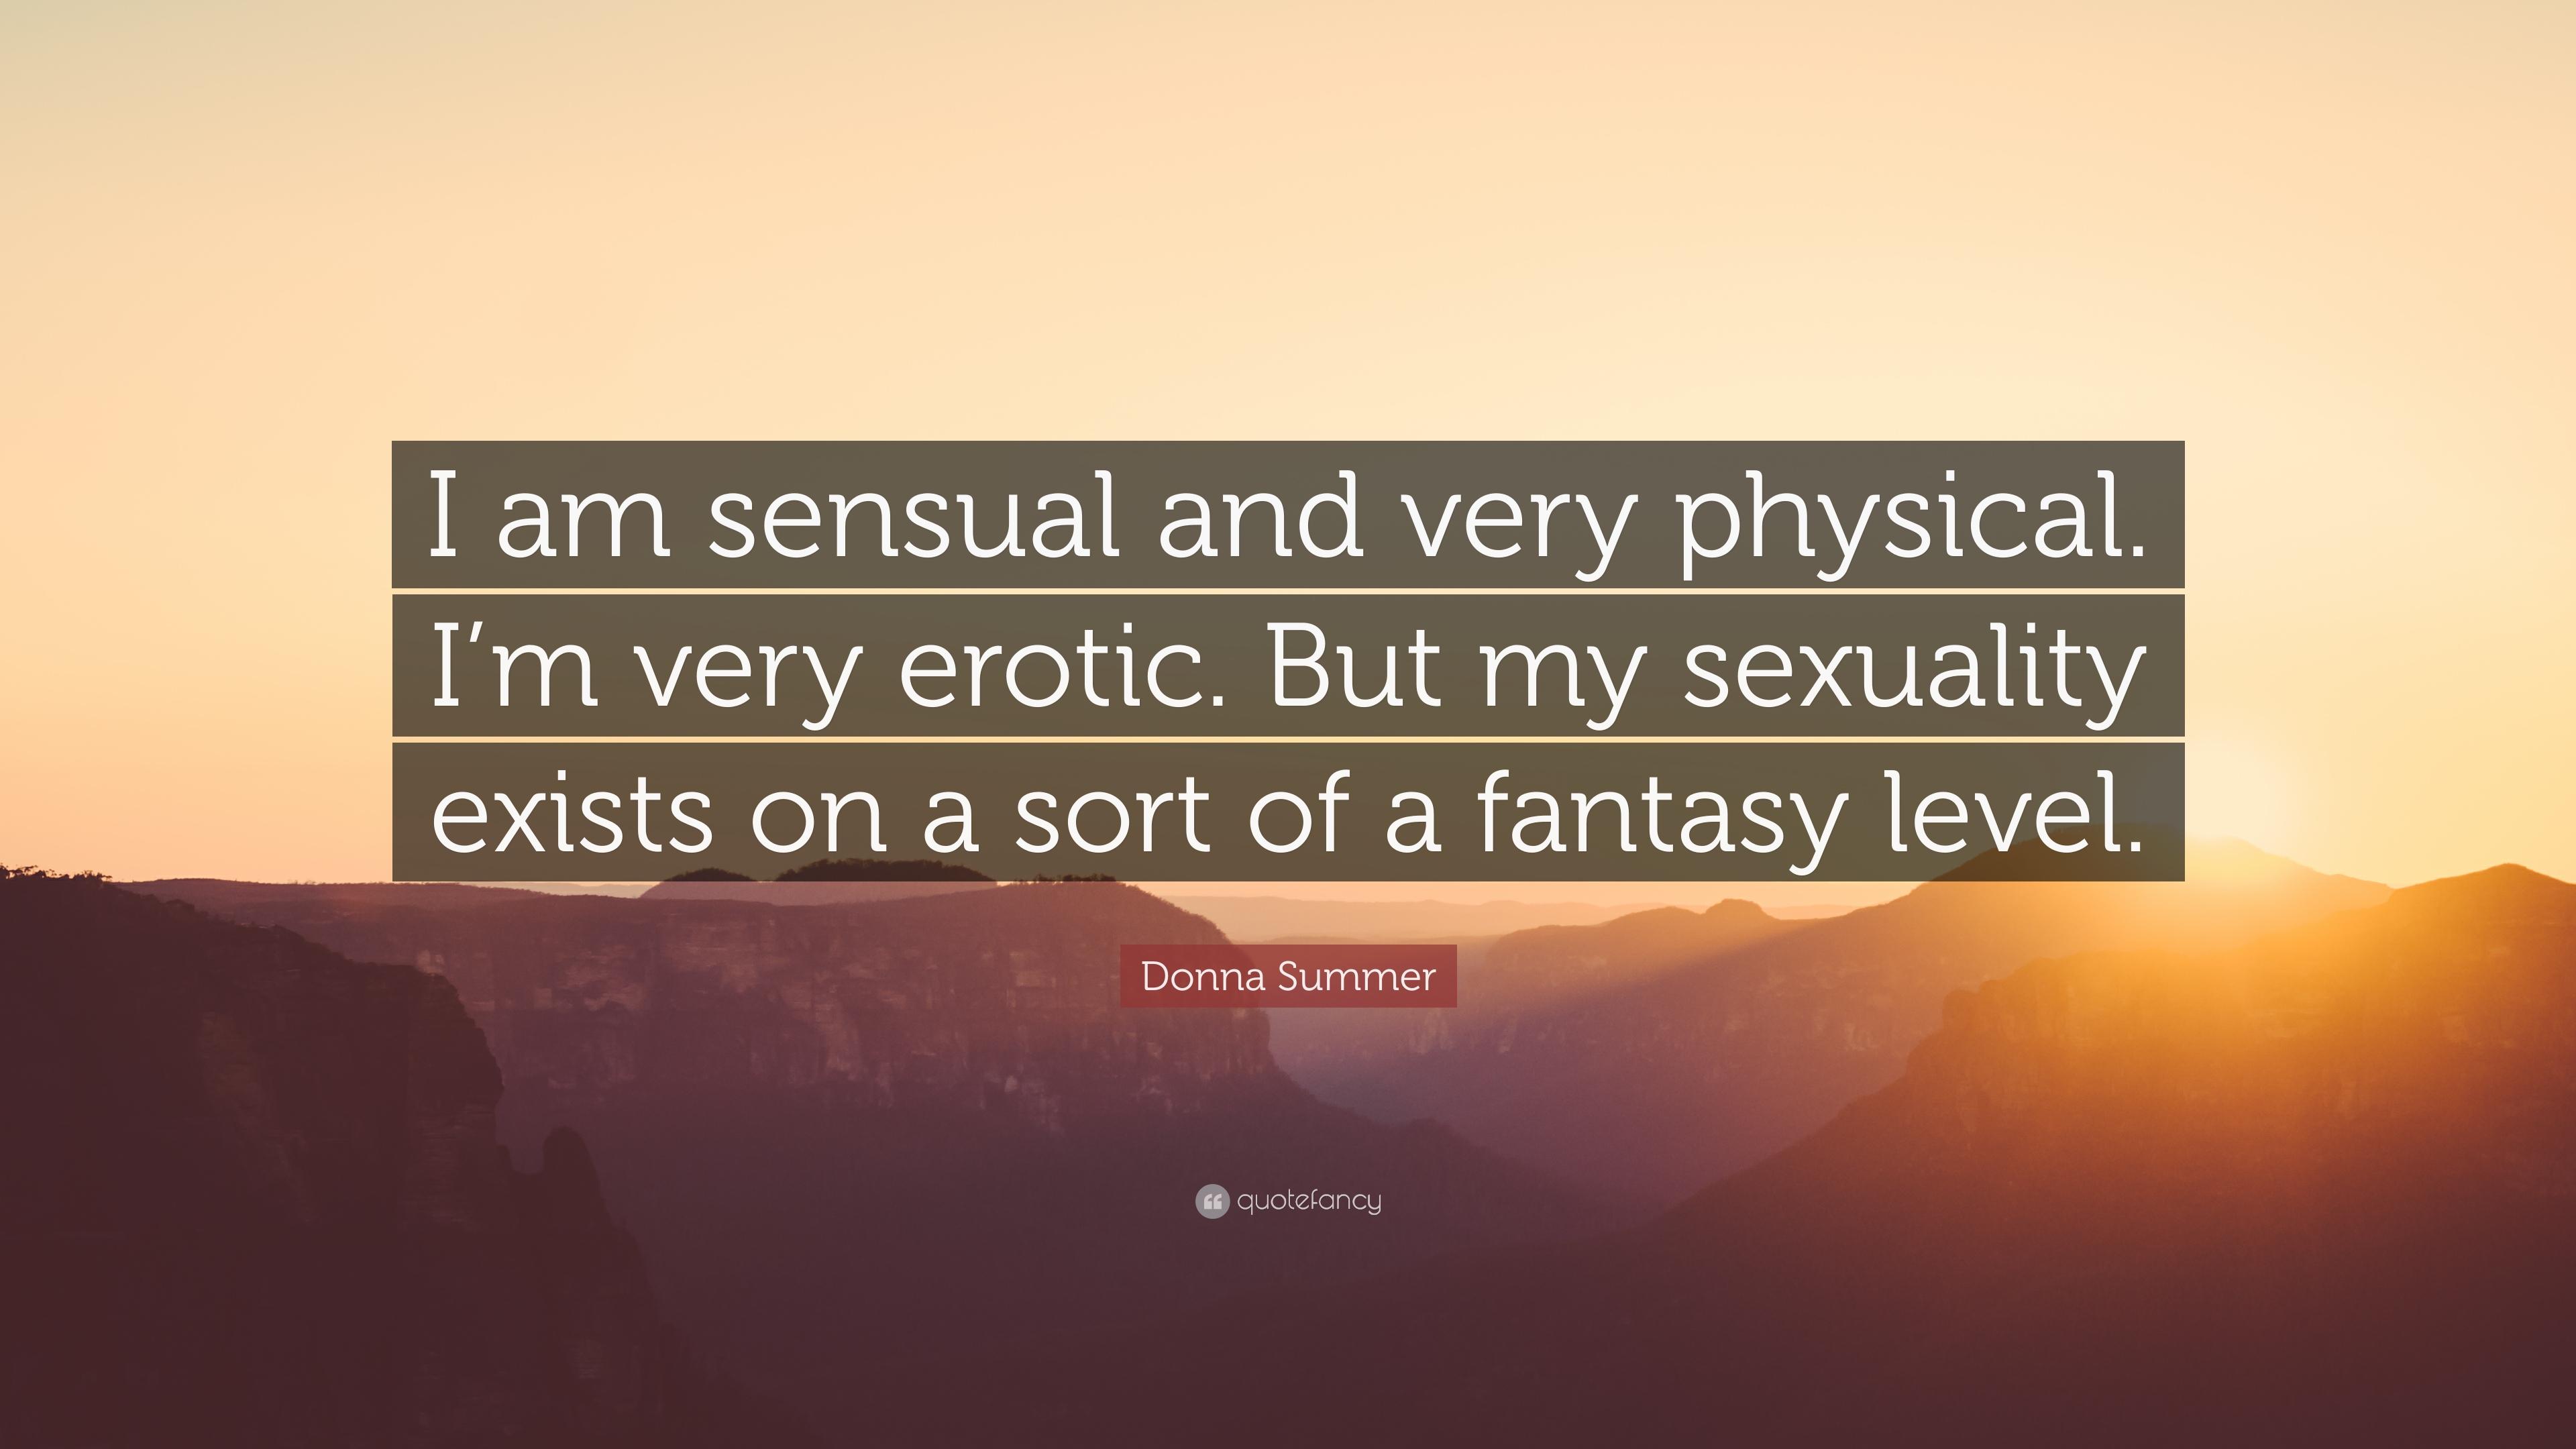 Donna Summer Quote: “I am sensual and very physical. I'm very erotic